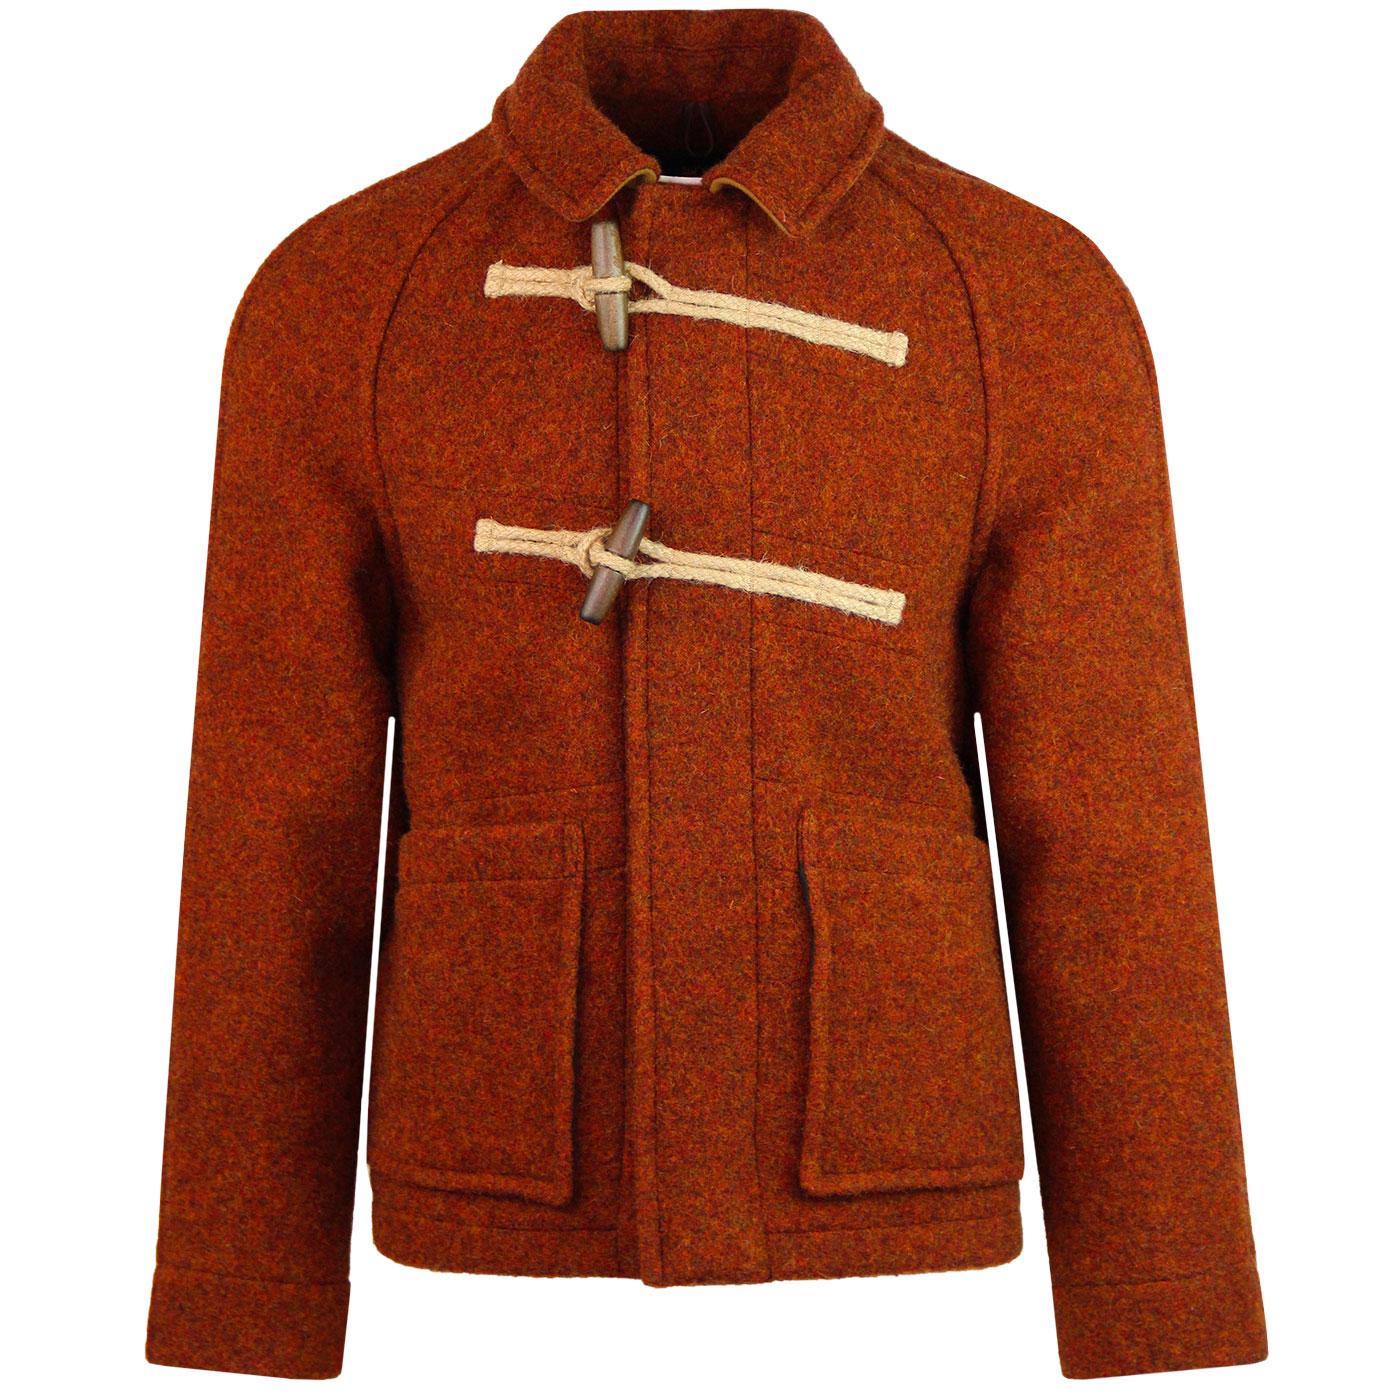 GLOVERALL 1960s Mod Whitby Deck Duffle Coat (Rust)